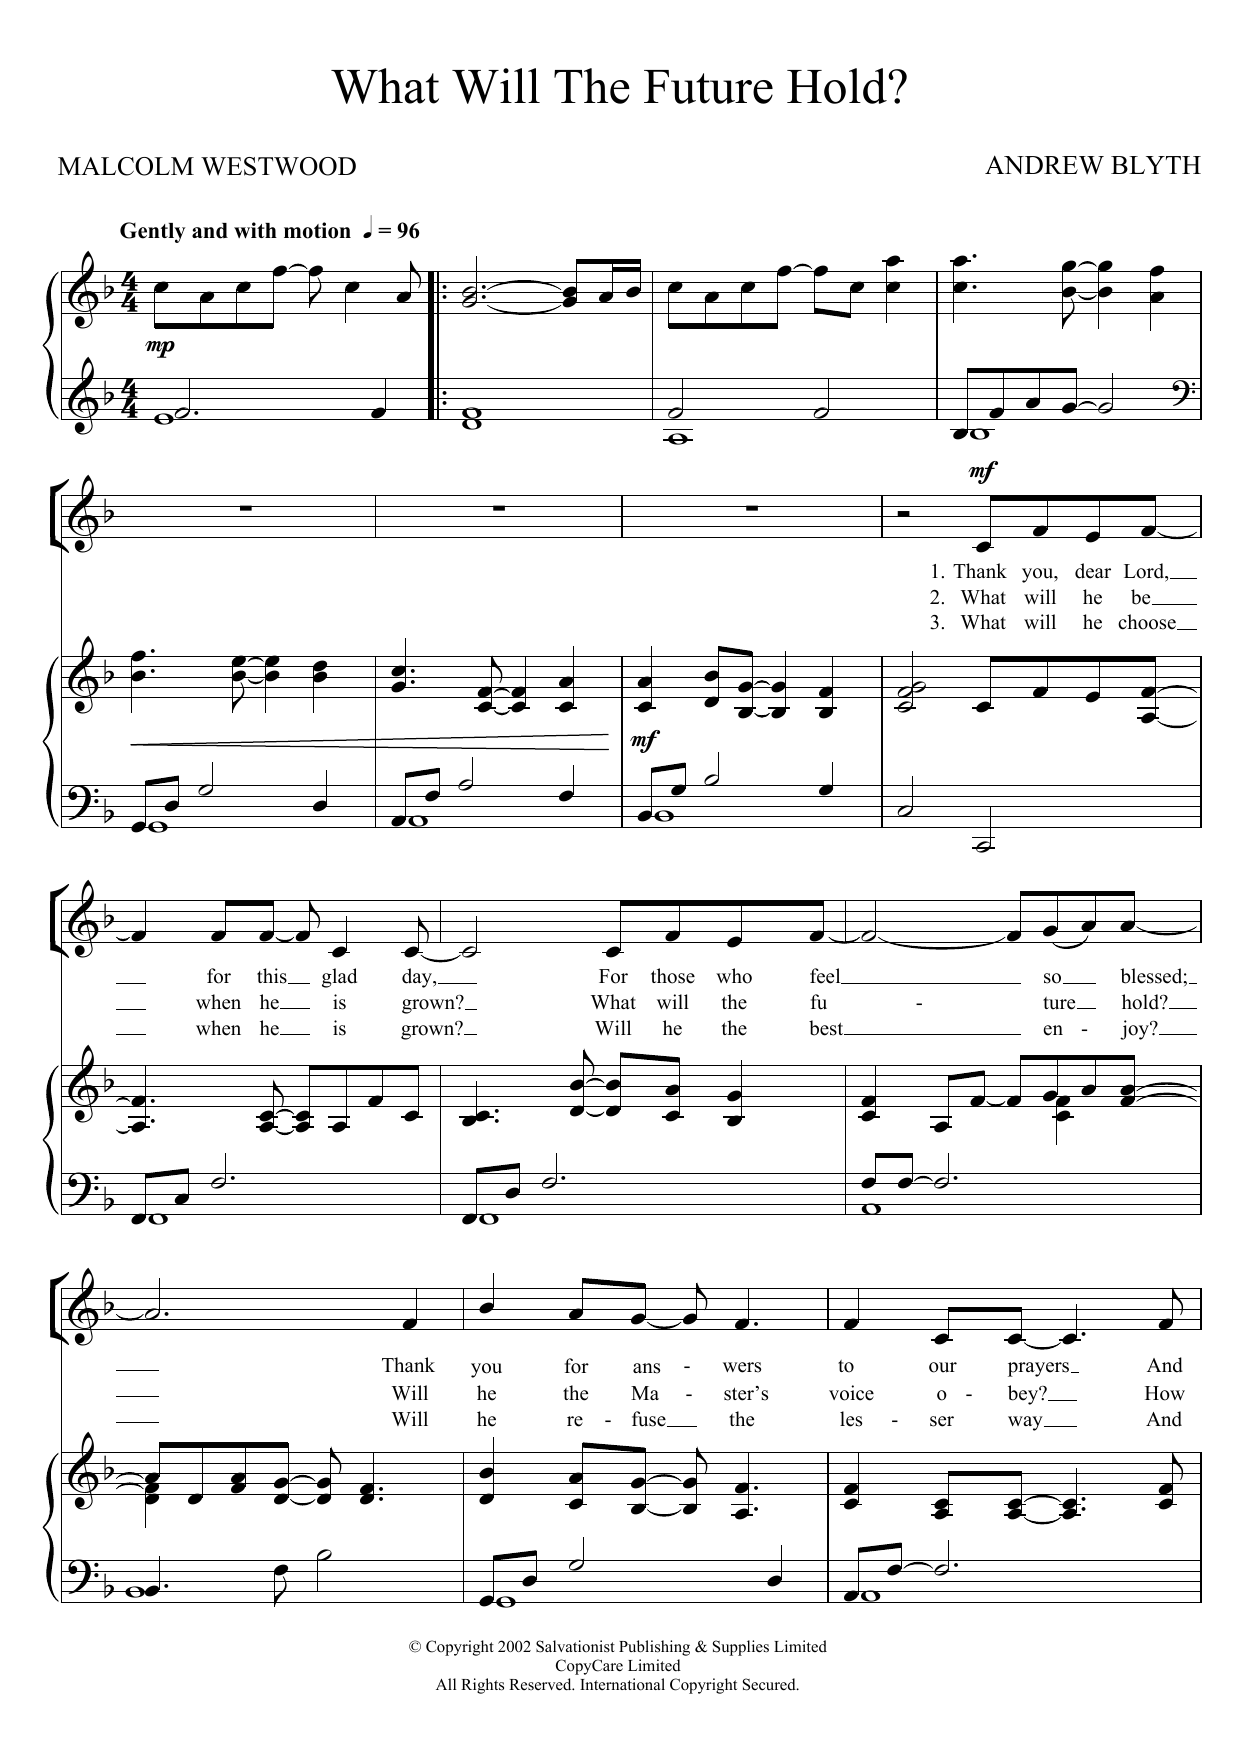 Download The Salvation Army What Will The Future Hold? Sheet Music